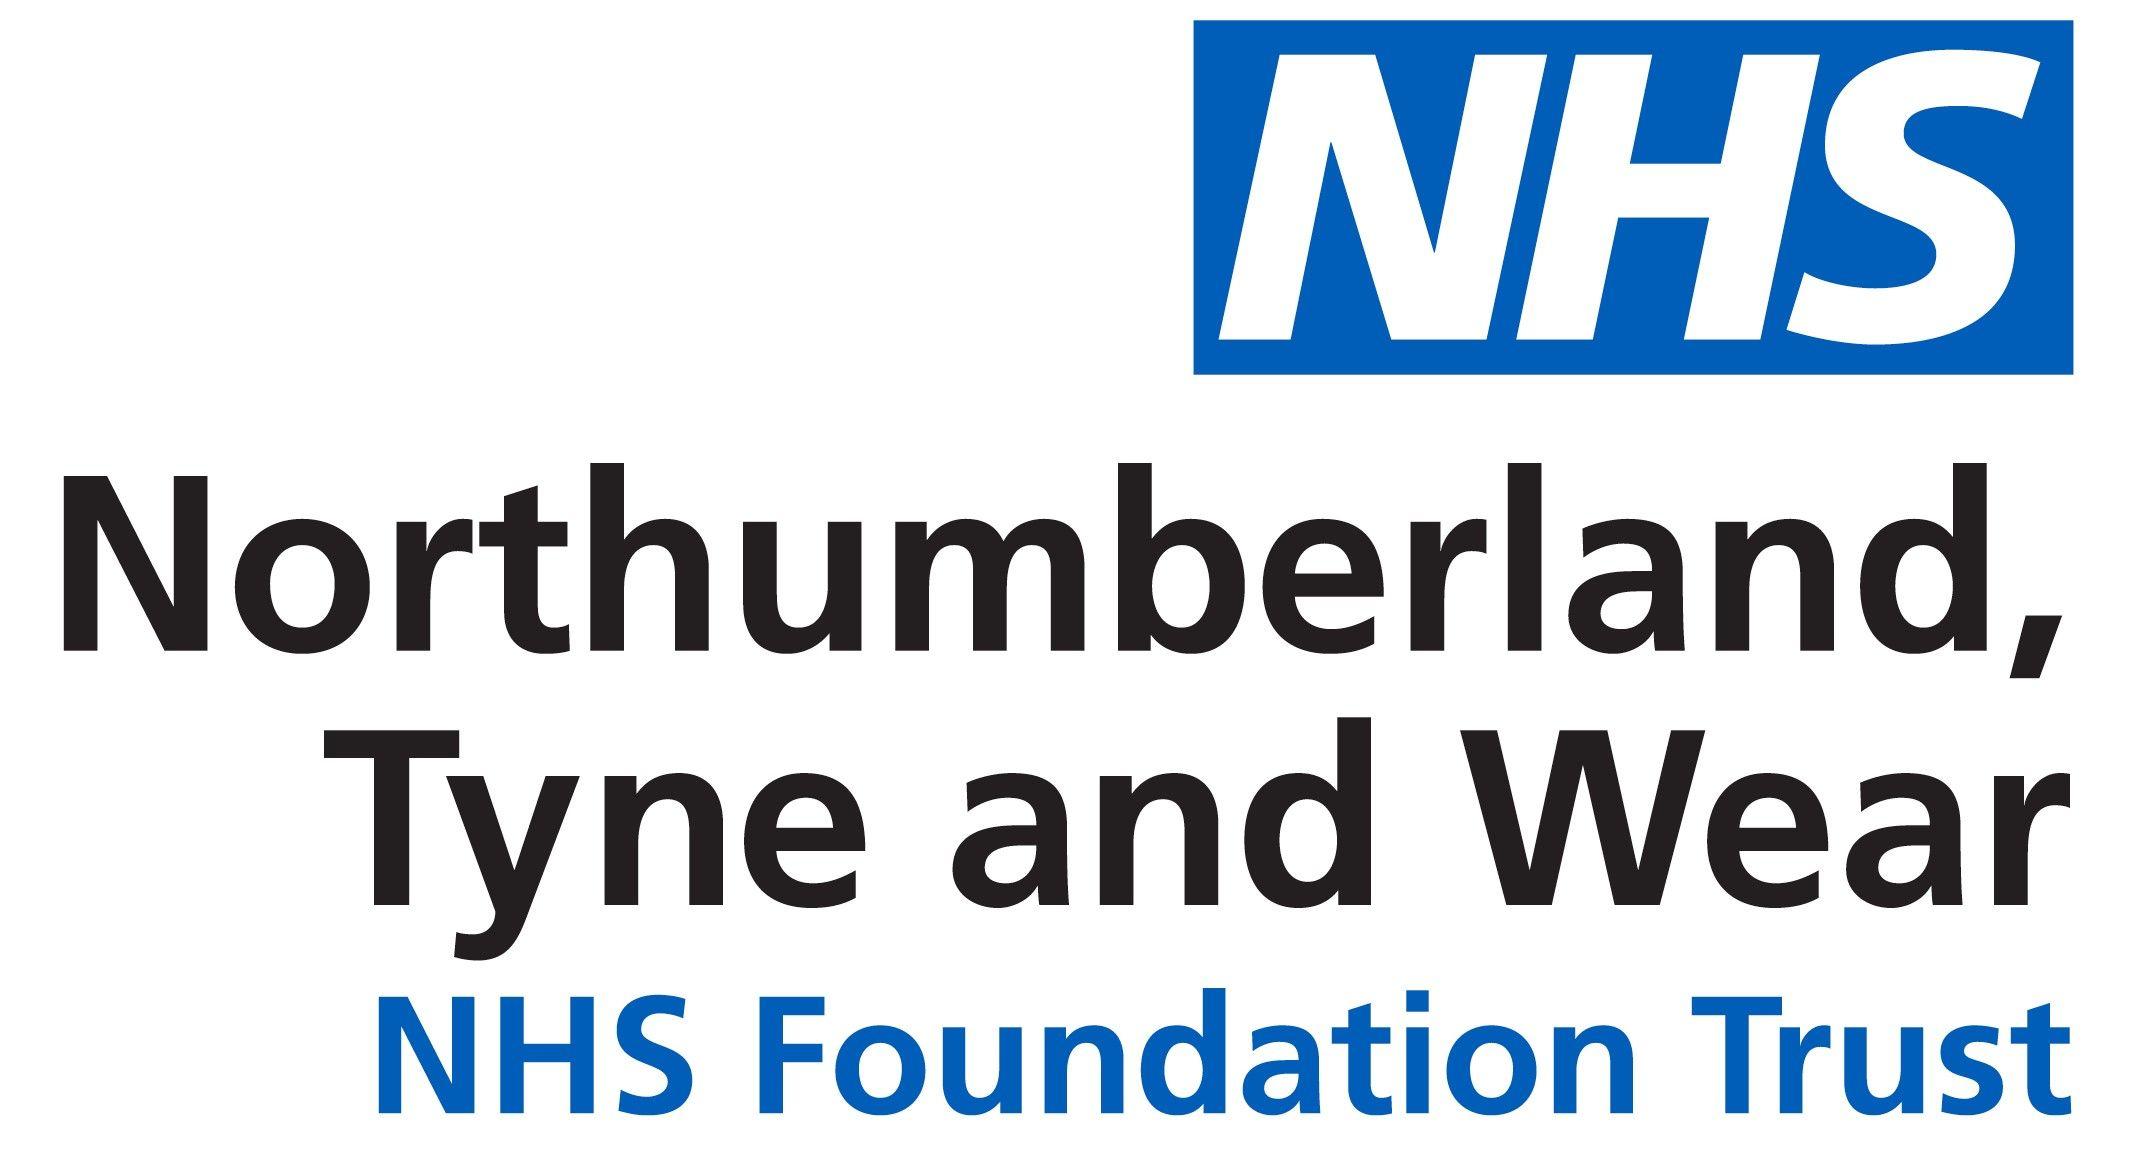 NTW Logo - Trust NEW LOGO High Res. Northumberland, Tyne And Wear NHS